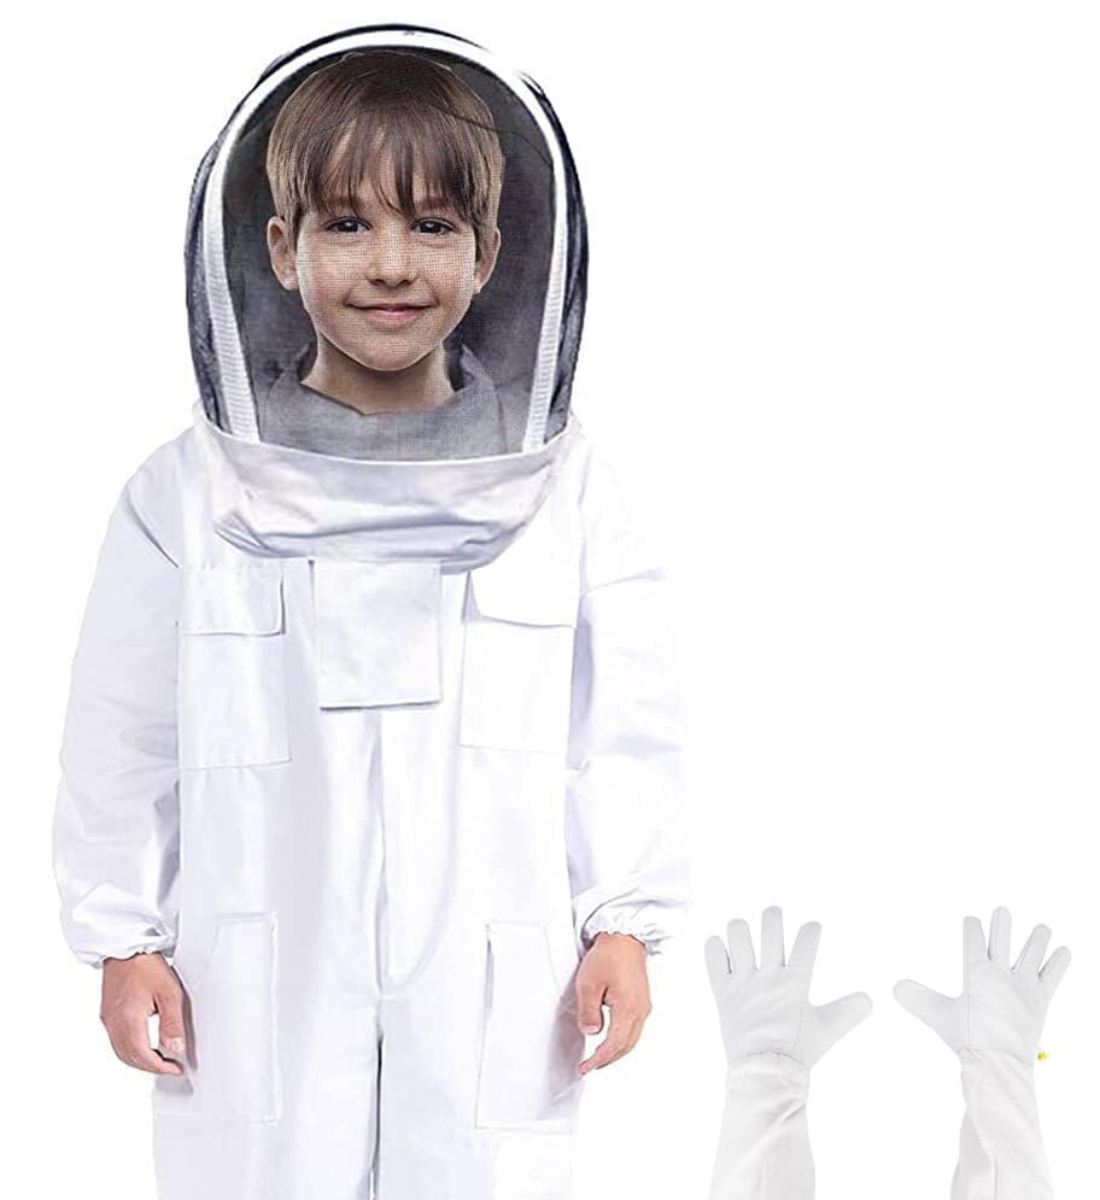 Bebees offers a Custom made childrens bee suit